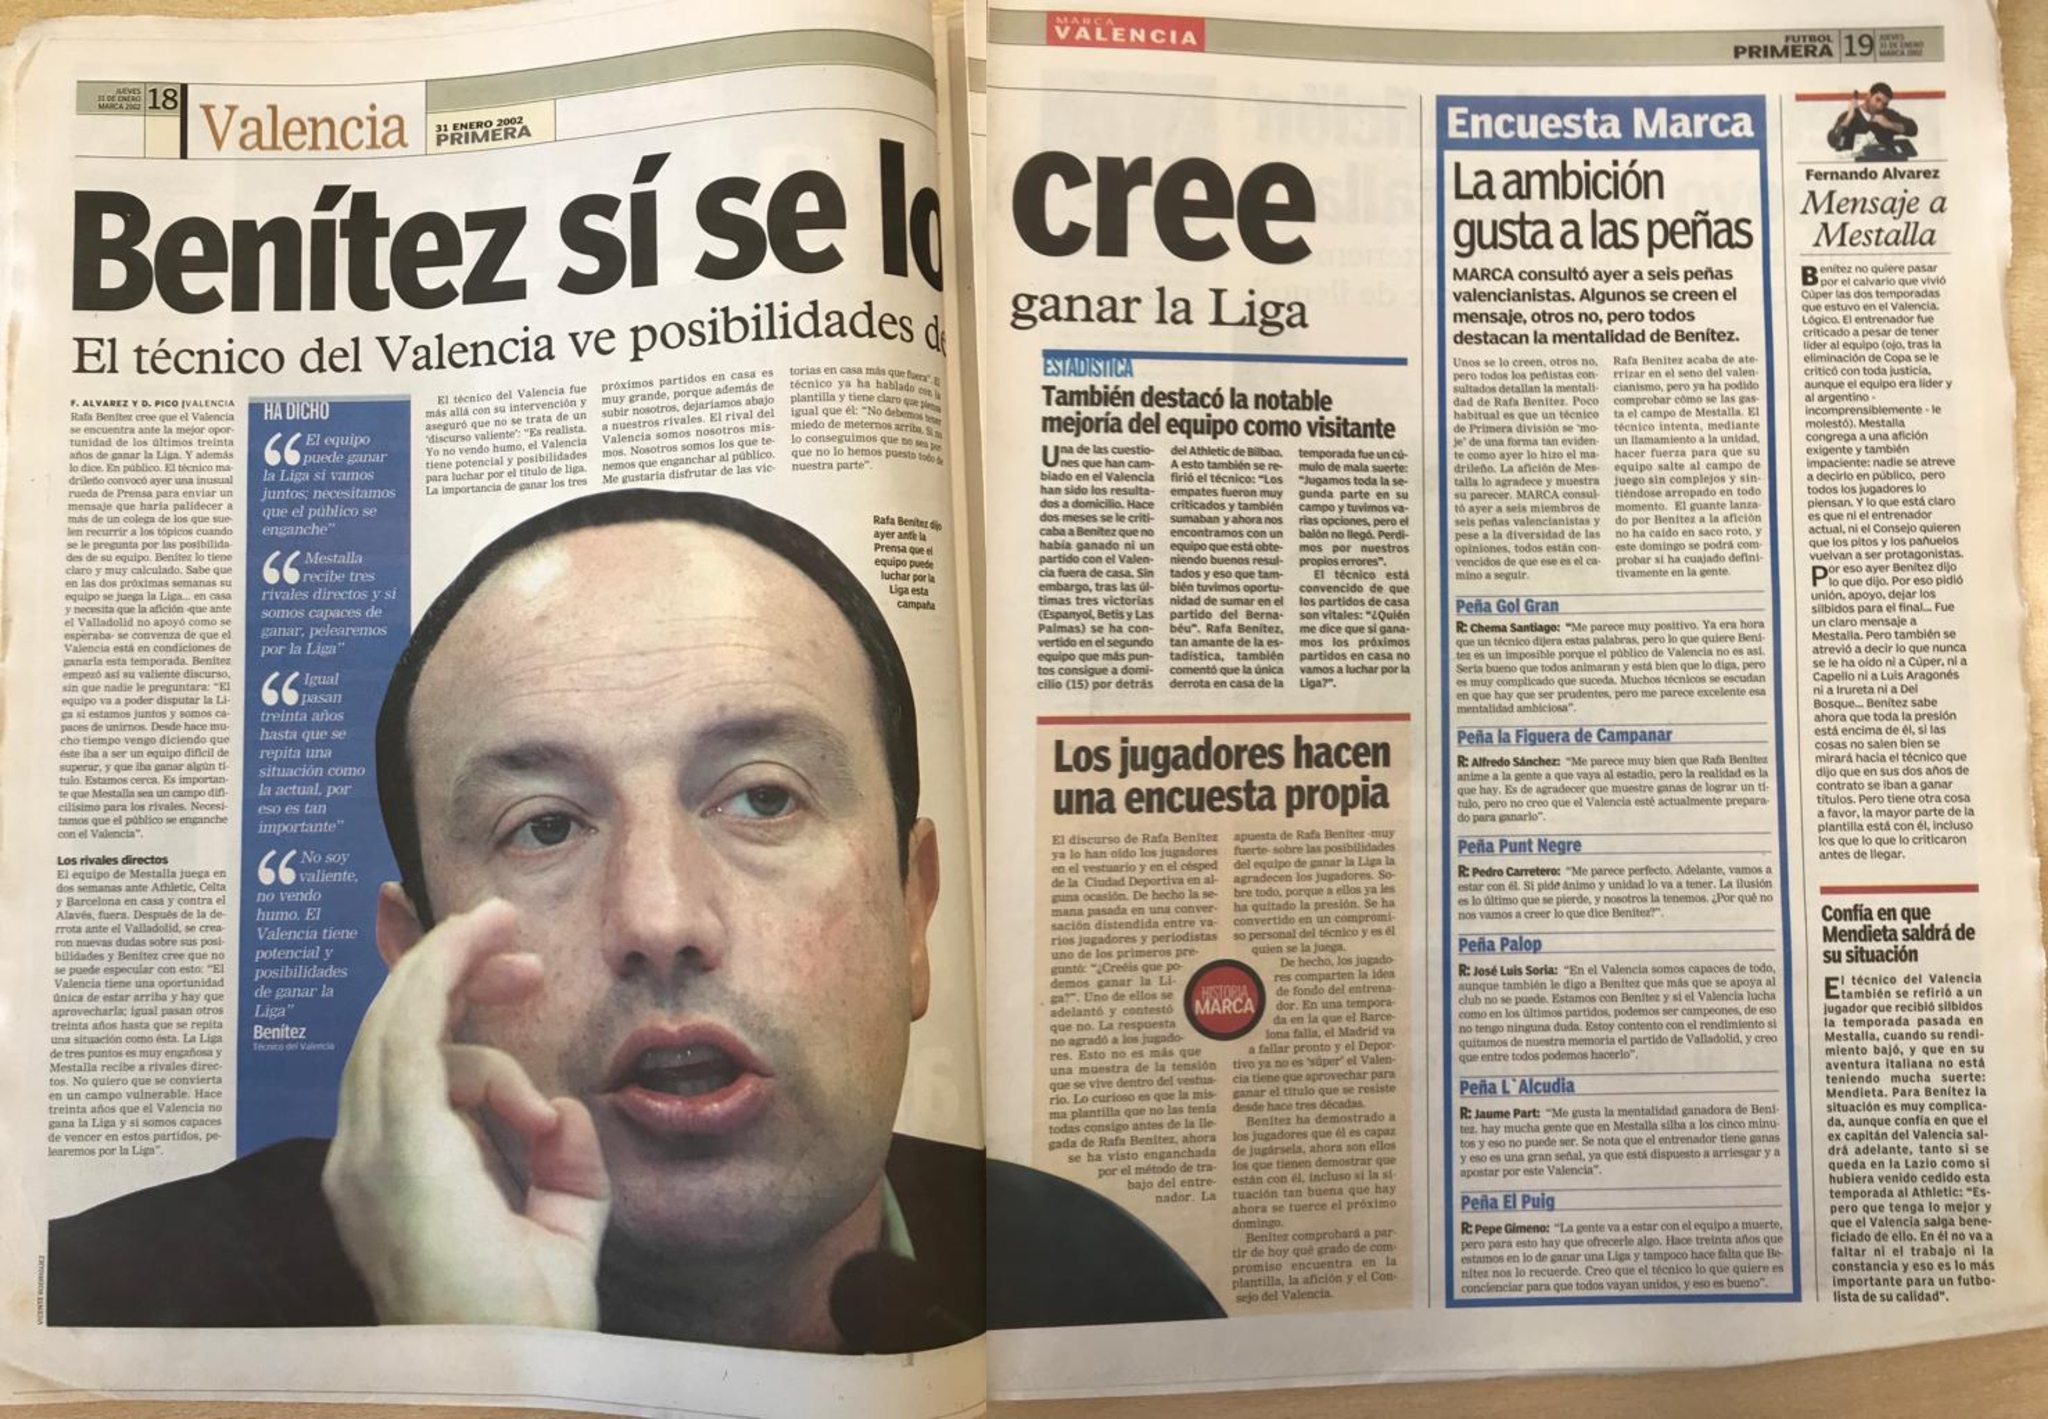 MARCA page after Rafa Benítez's press conference in January 2002 when he said it was possible to win the League.